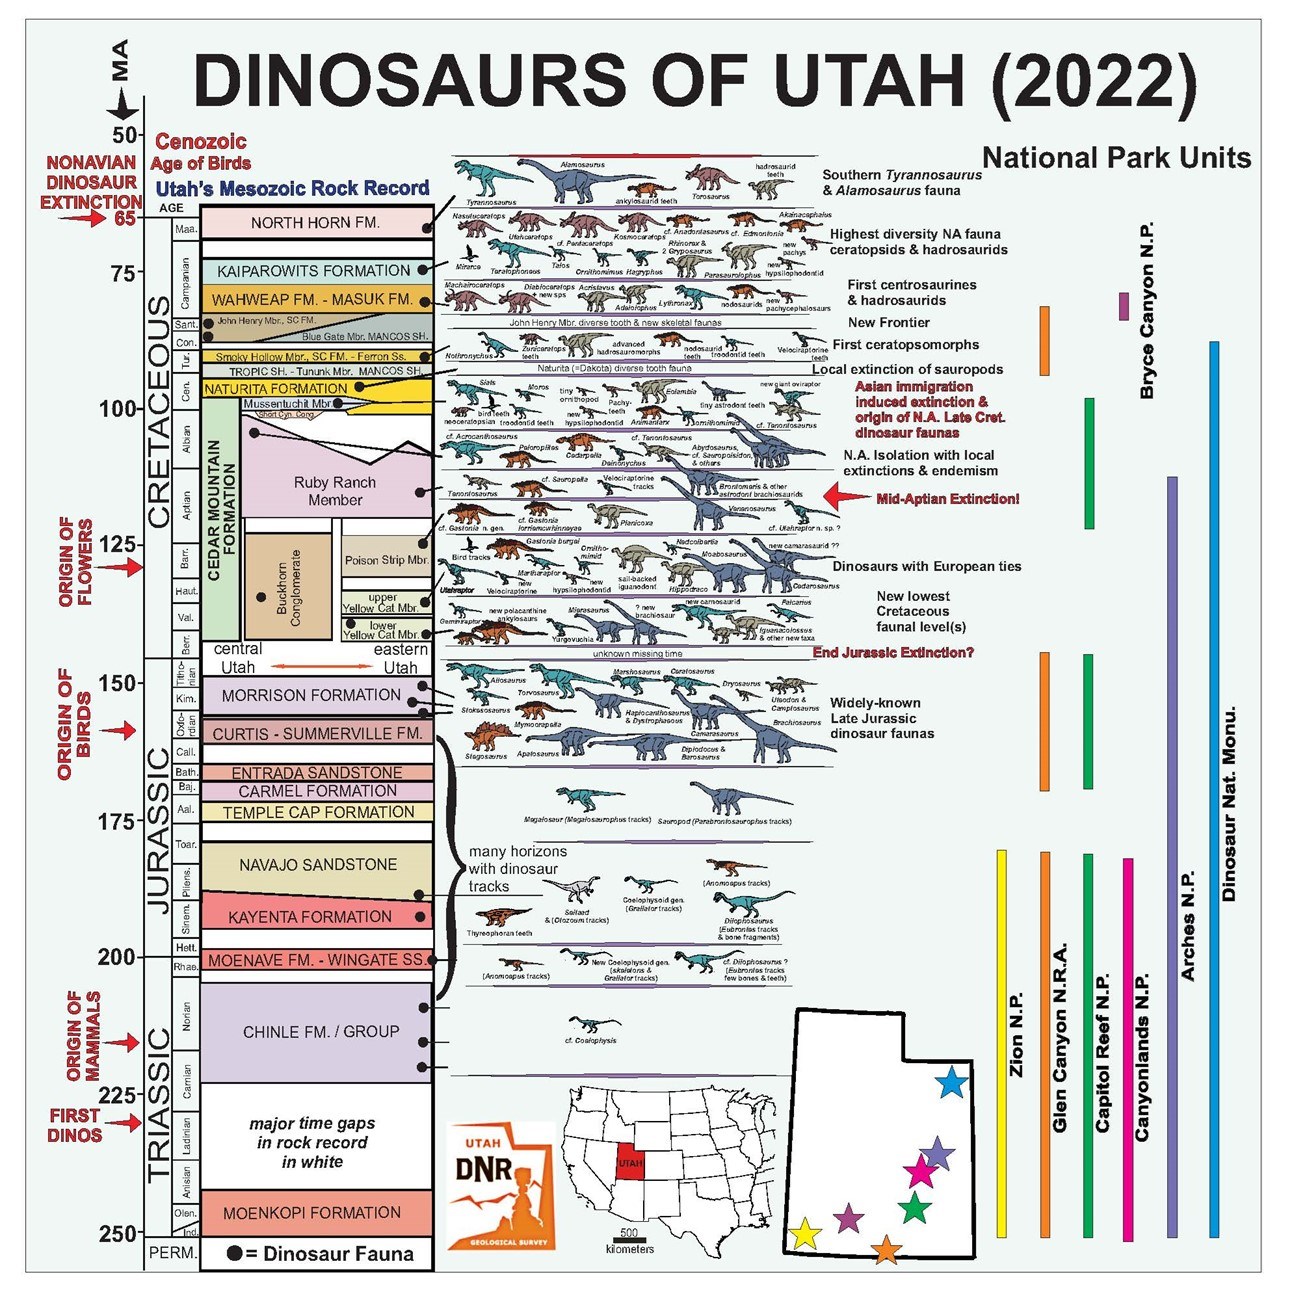 copy of a complex chart showing geologic time from 65 to 250 million years ago with major rock formations and dinosaurs found in utah and bars to indicate the ages of rocks in Utah's national parks